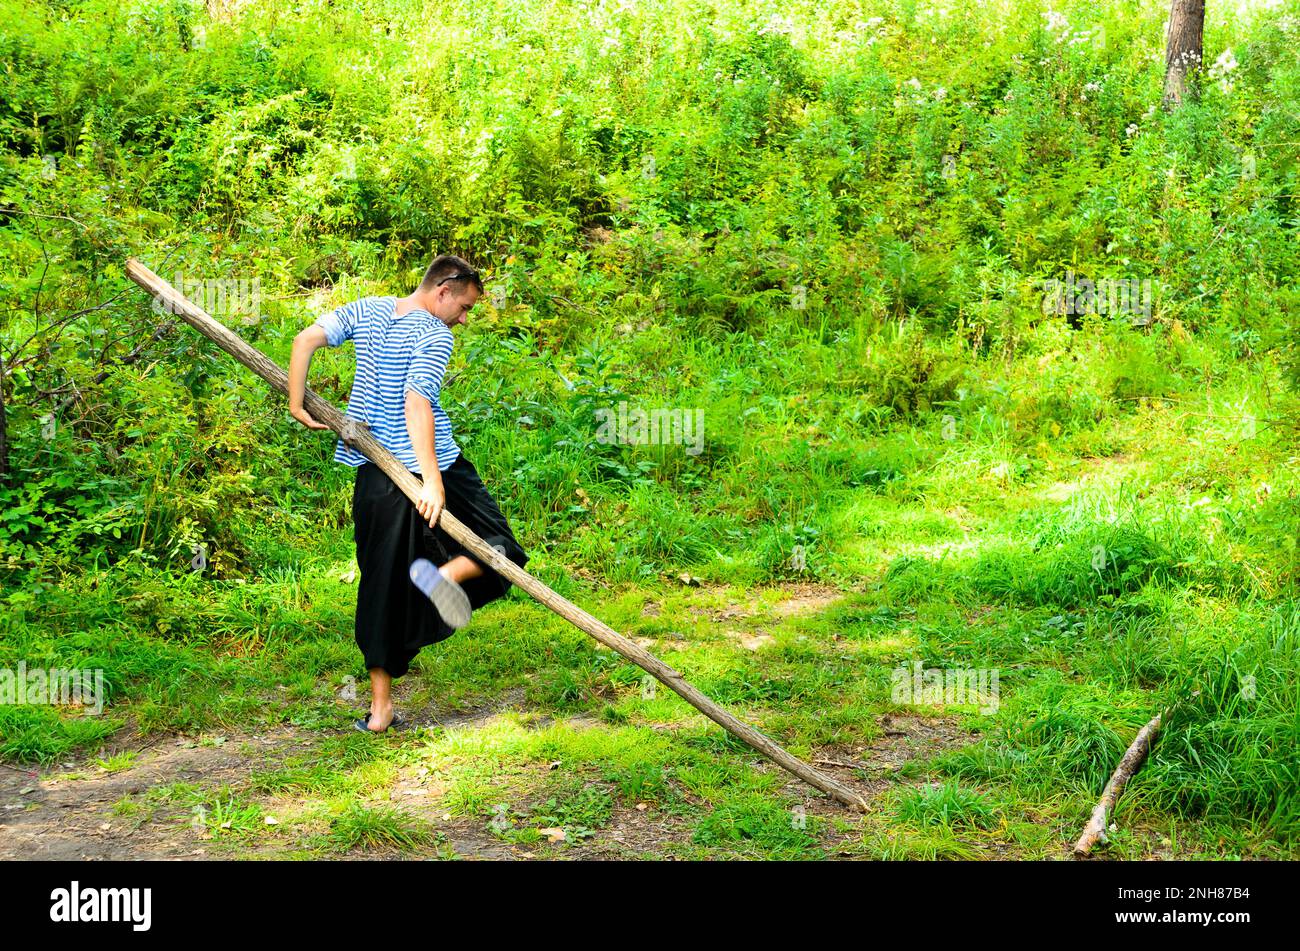 The man in the wide trousers yoga doing exercises turns the big stick in the woods on the grass. Stock Photo